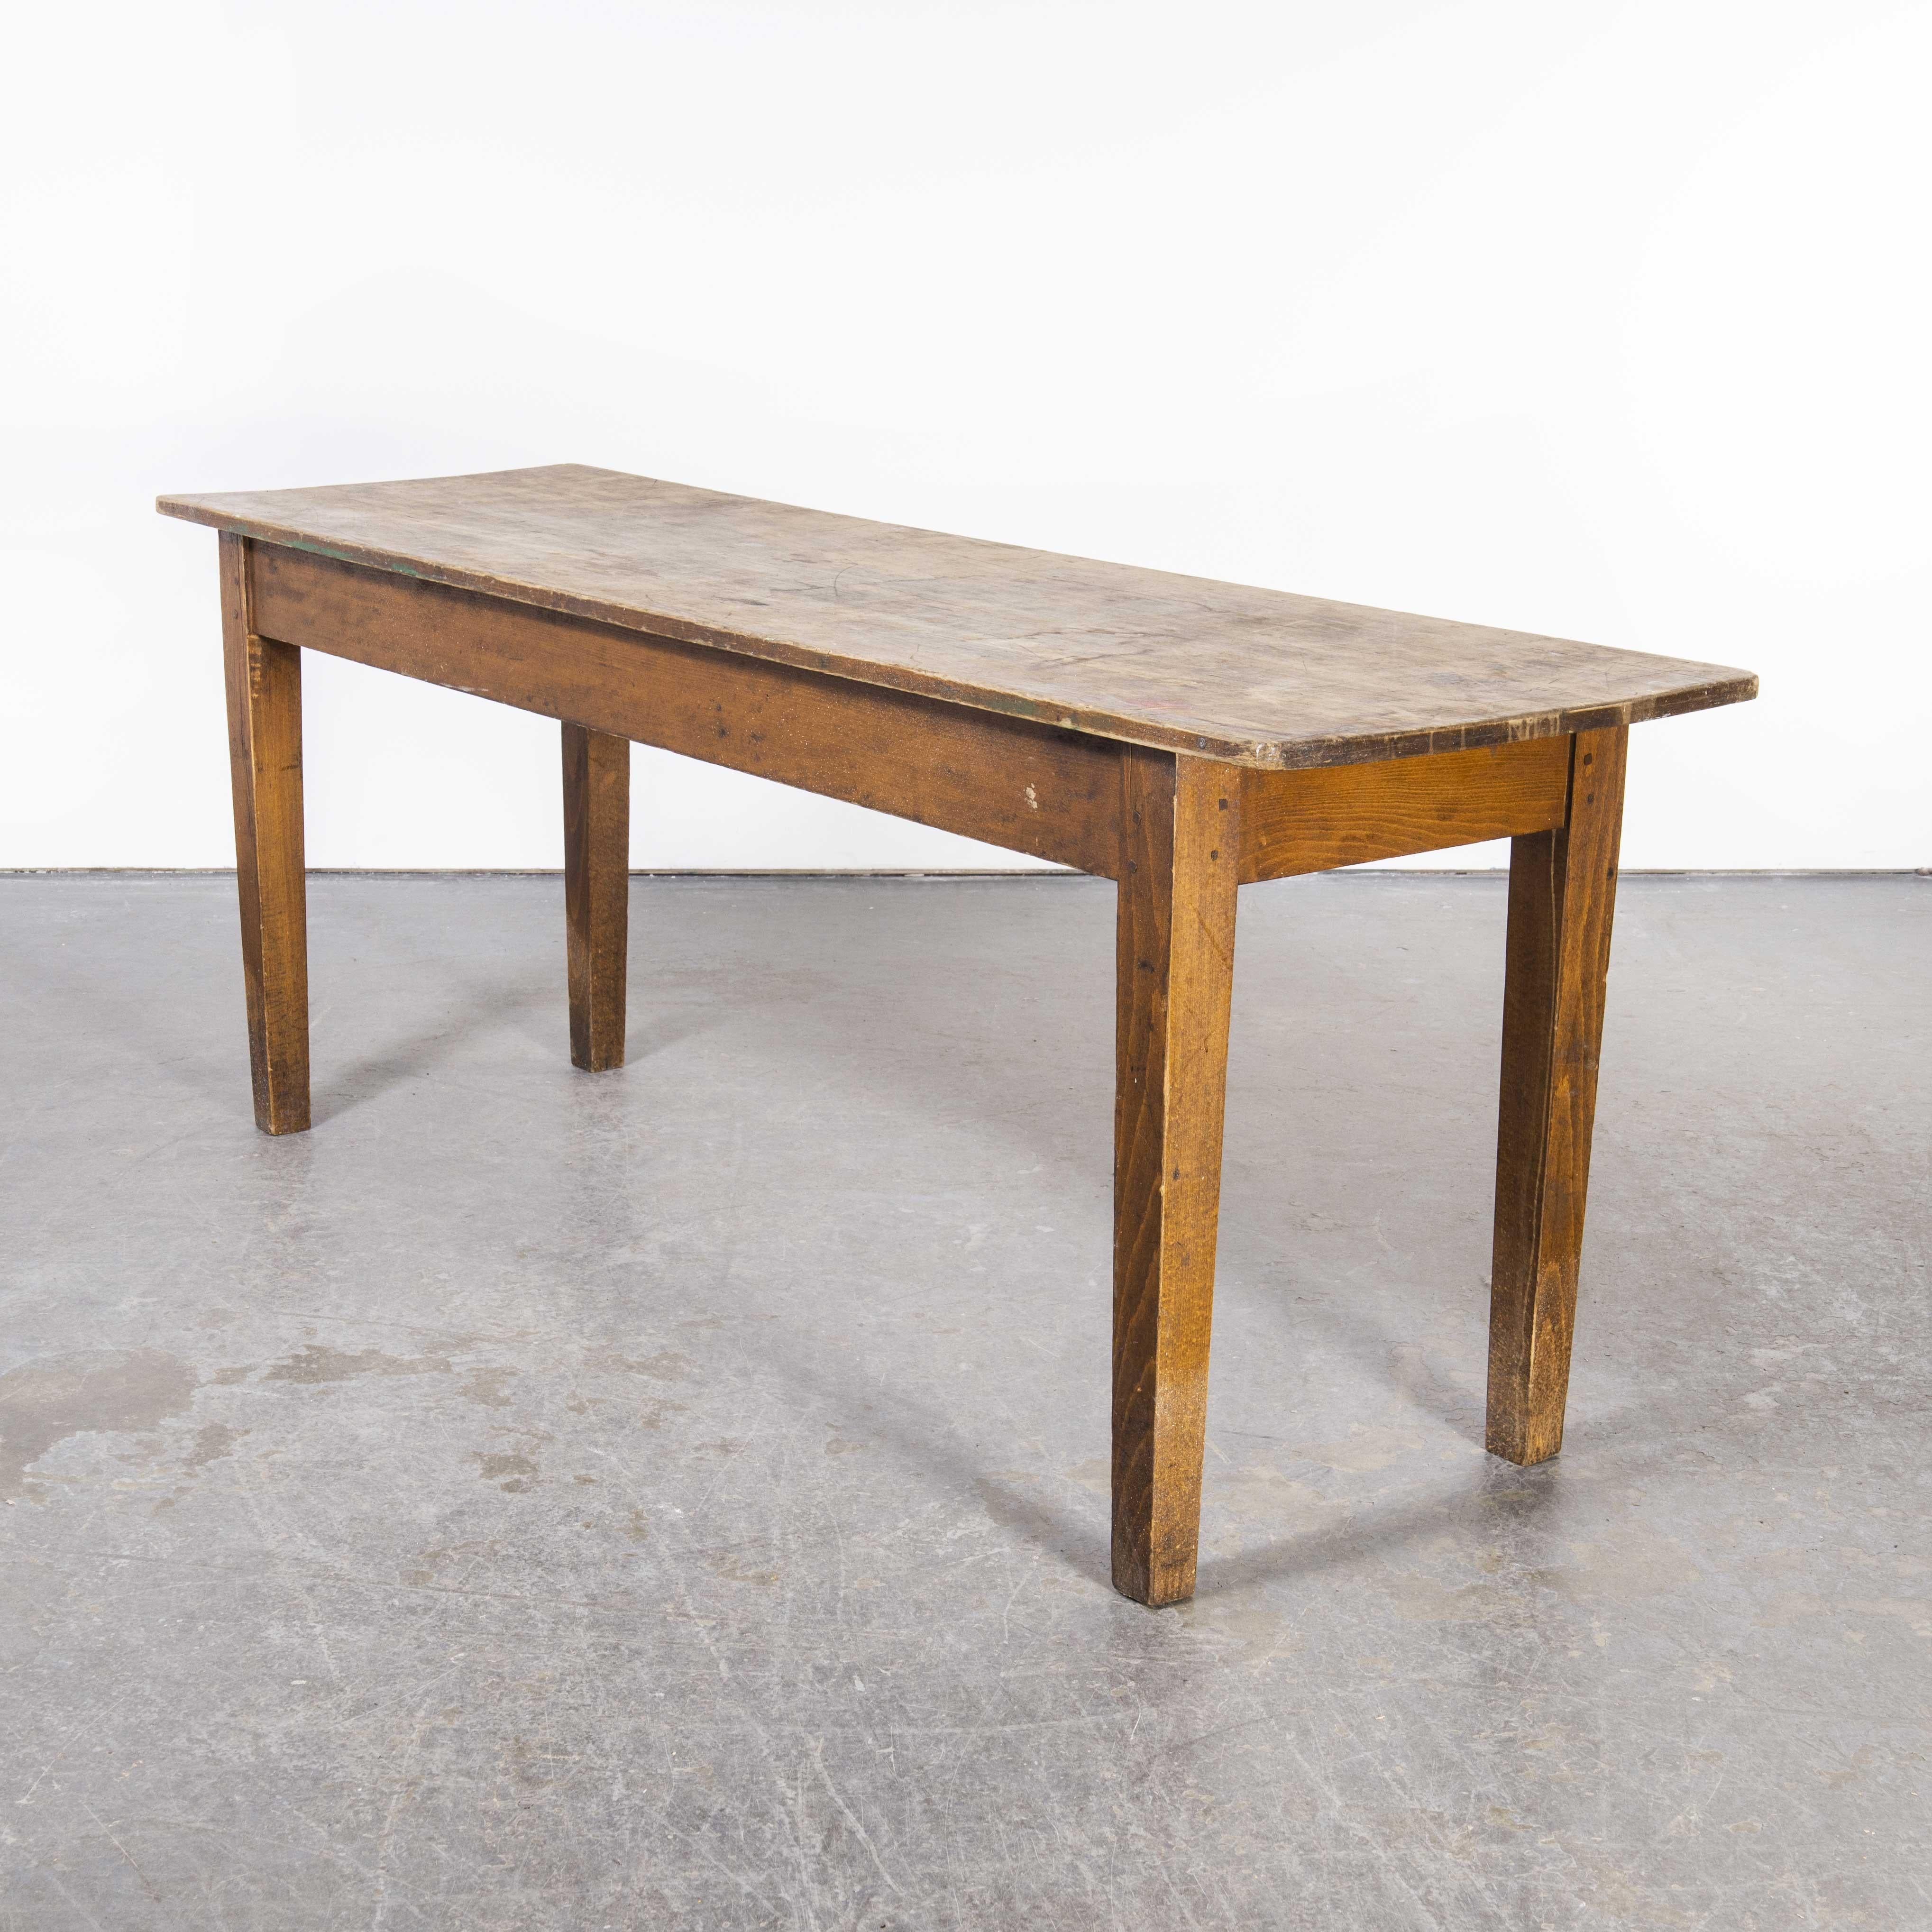 1950’s French workshop rectangular dining table
1950’s French workshop rectangular dining table. Sourced outside Lyon this is a good honest pine French workshop – dining table. Well made with a solid pine planked top and heavy weight legs and sub